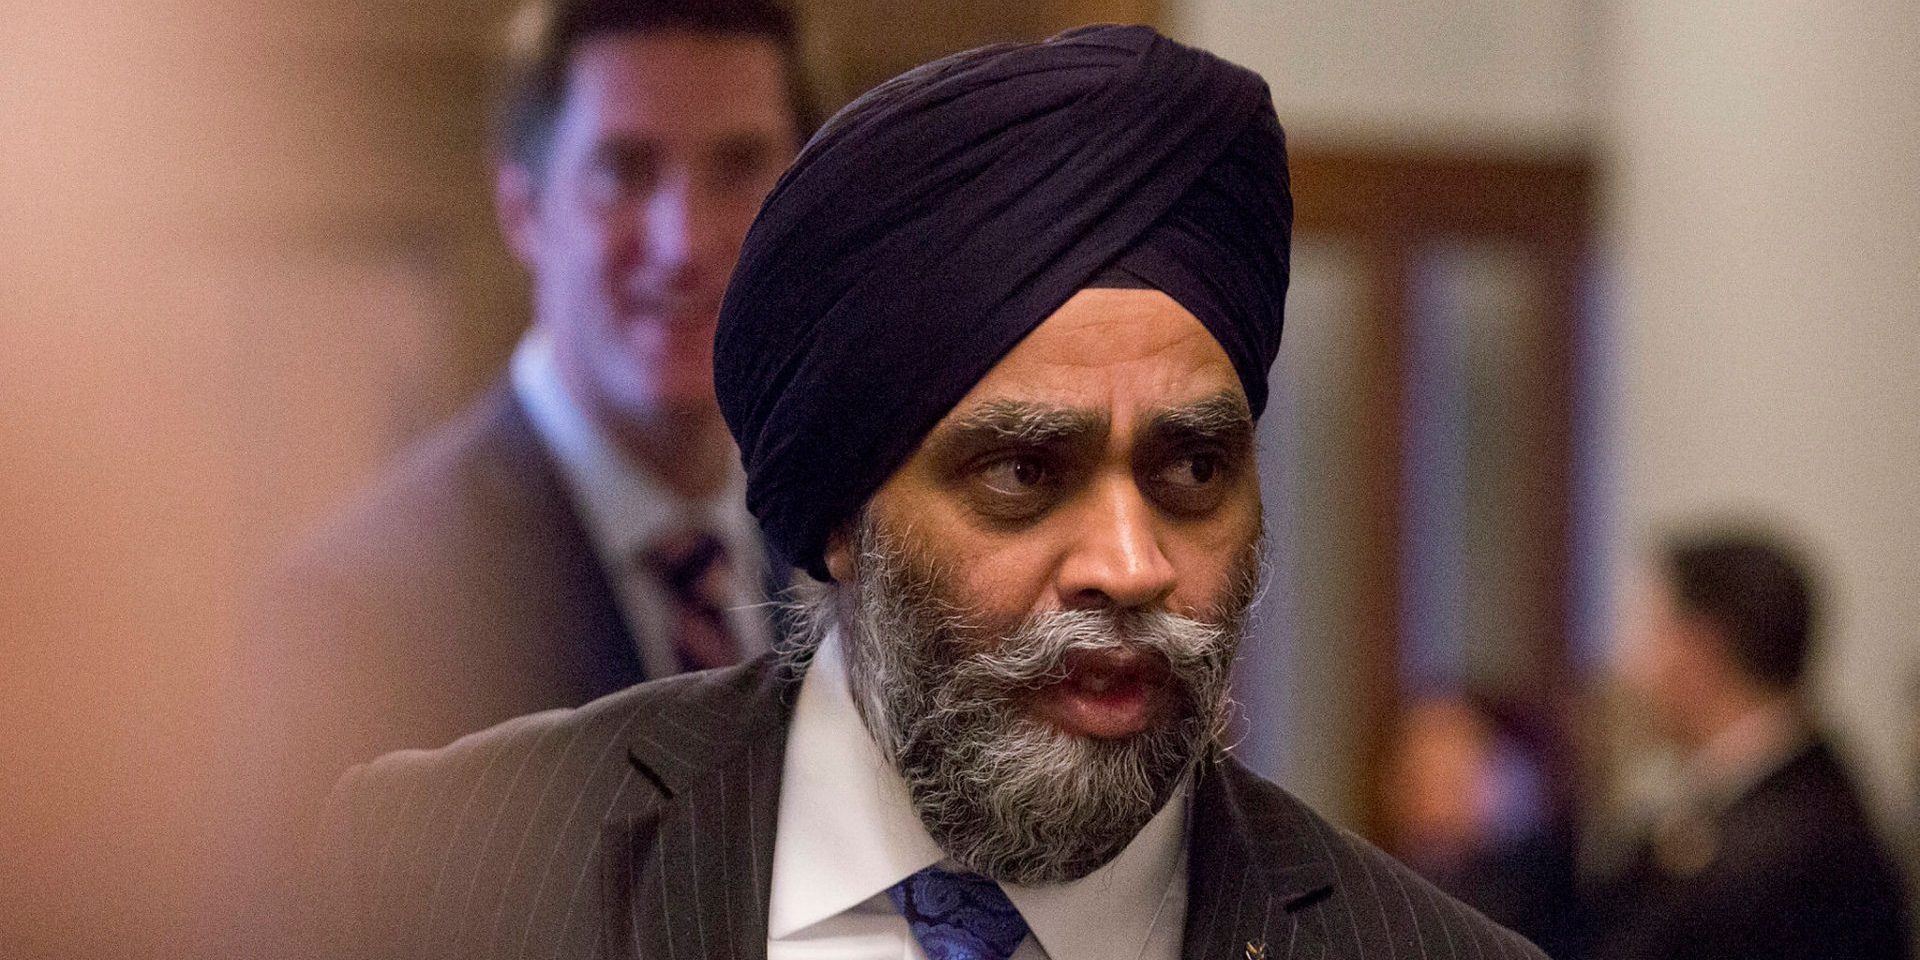 Minister of National Defence Harjit Sajjan leaves the Liberal party caucus meeting in West Block in Ottawa on Dec. 11, 2019. Andrew Meade